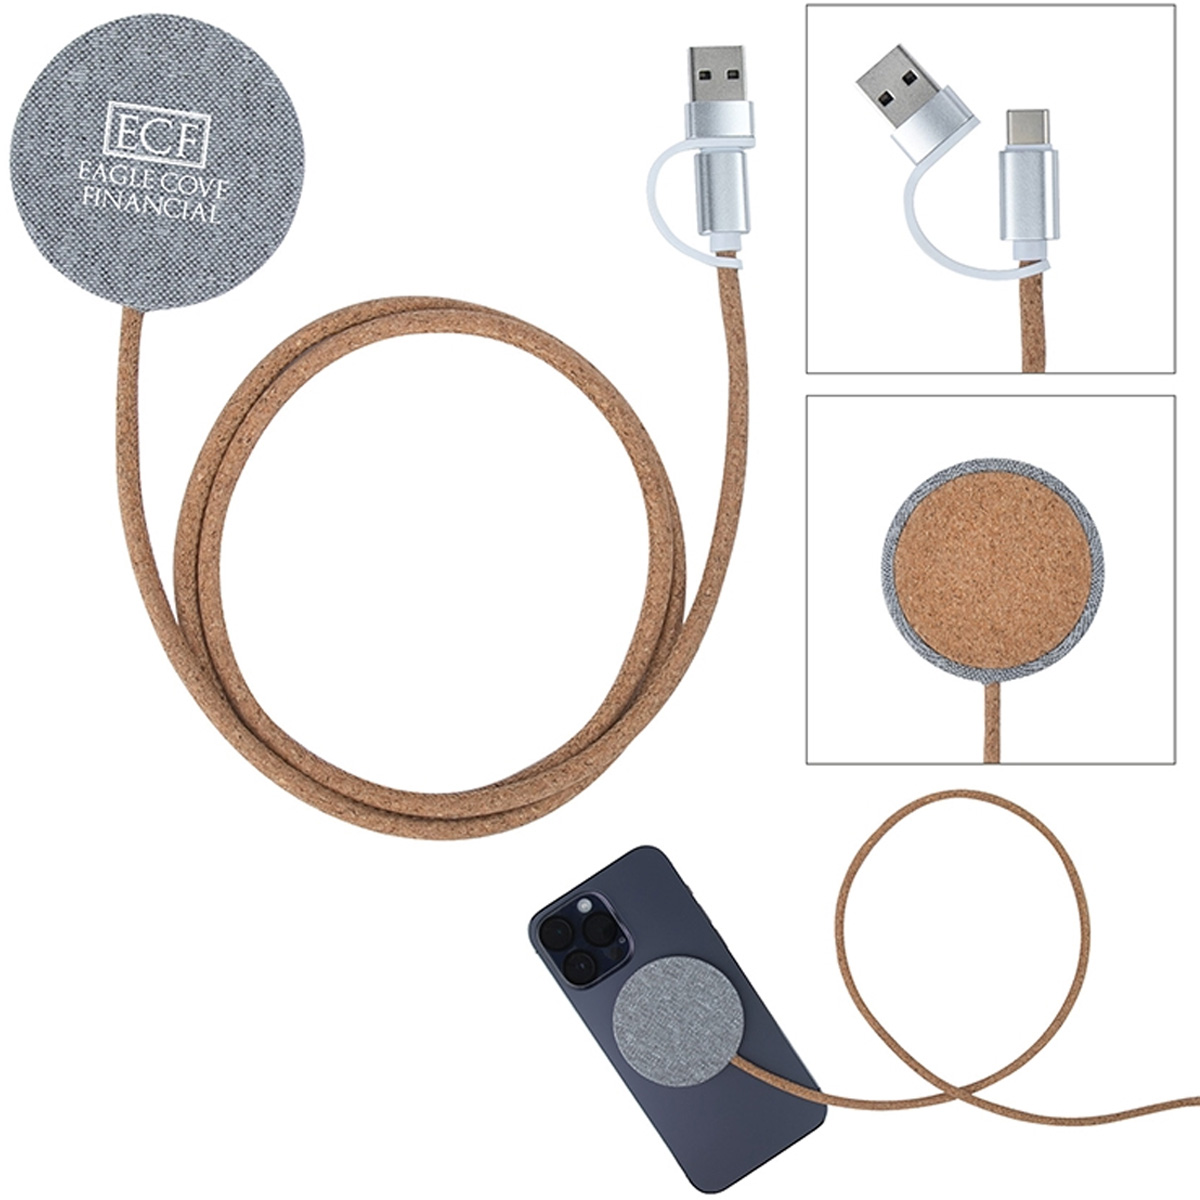 Recycled rPET & Cork Wireless Charging Pad